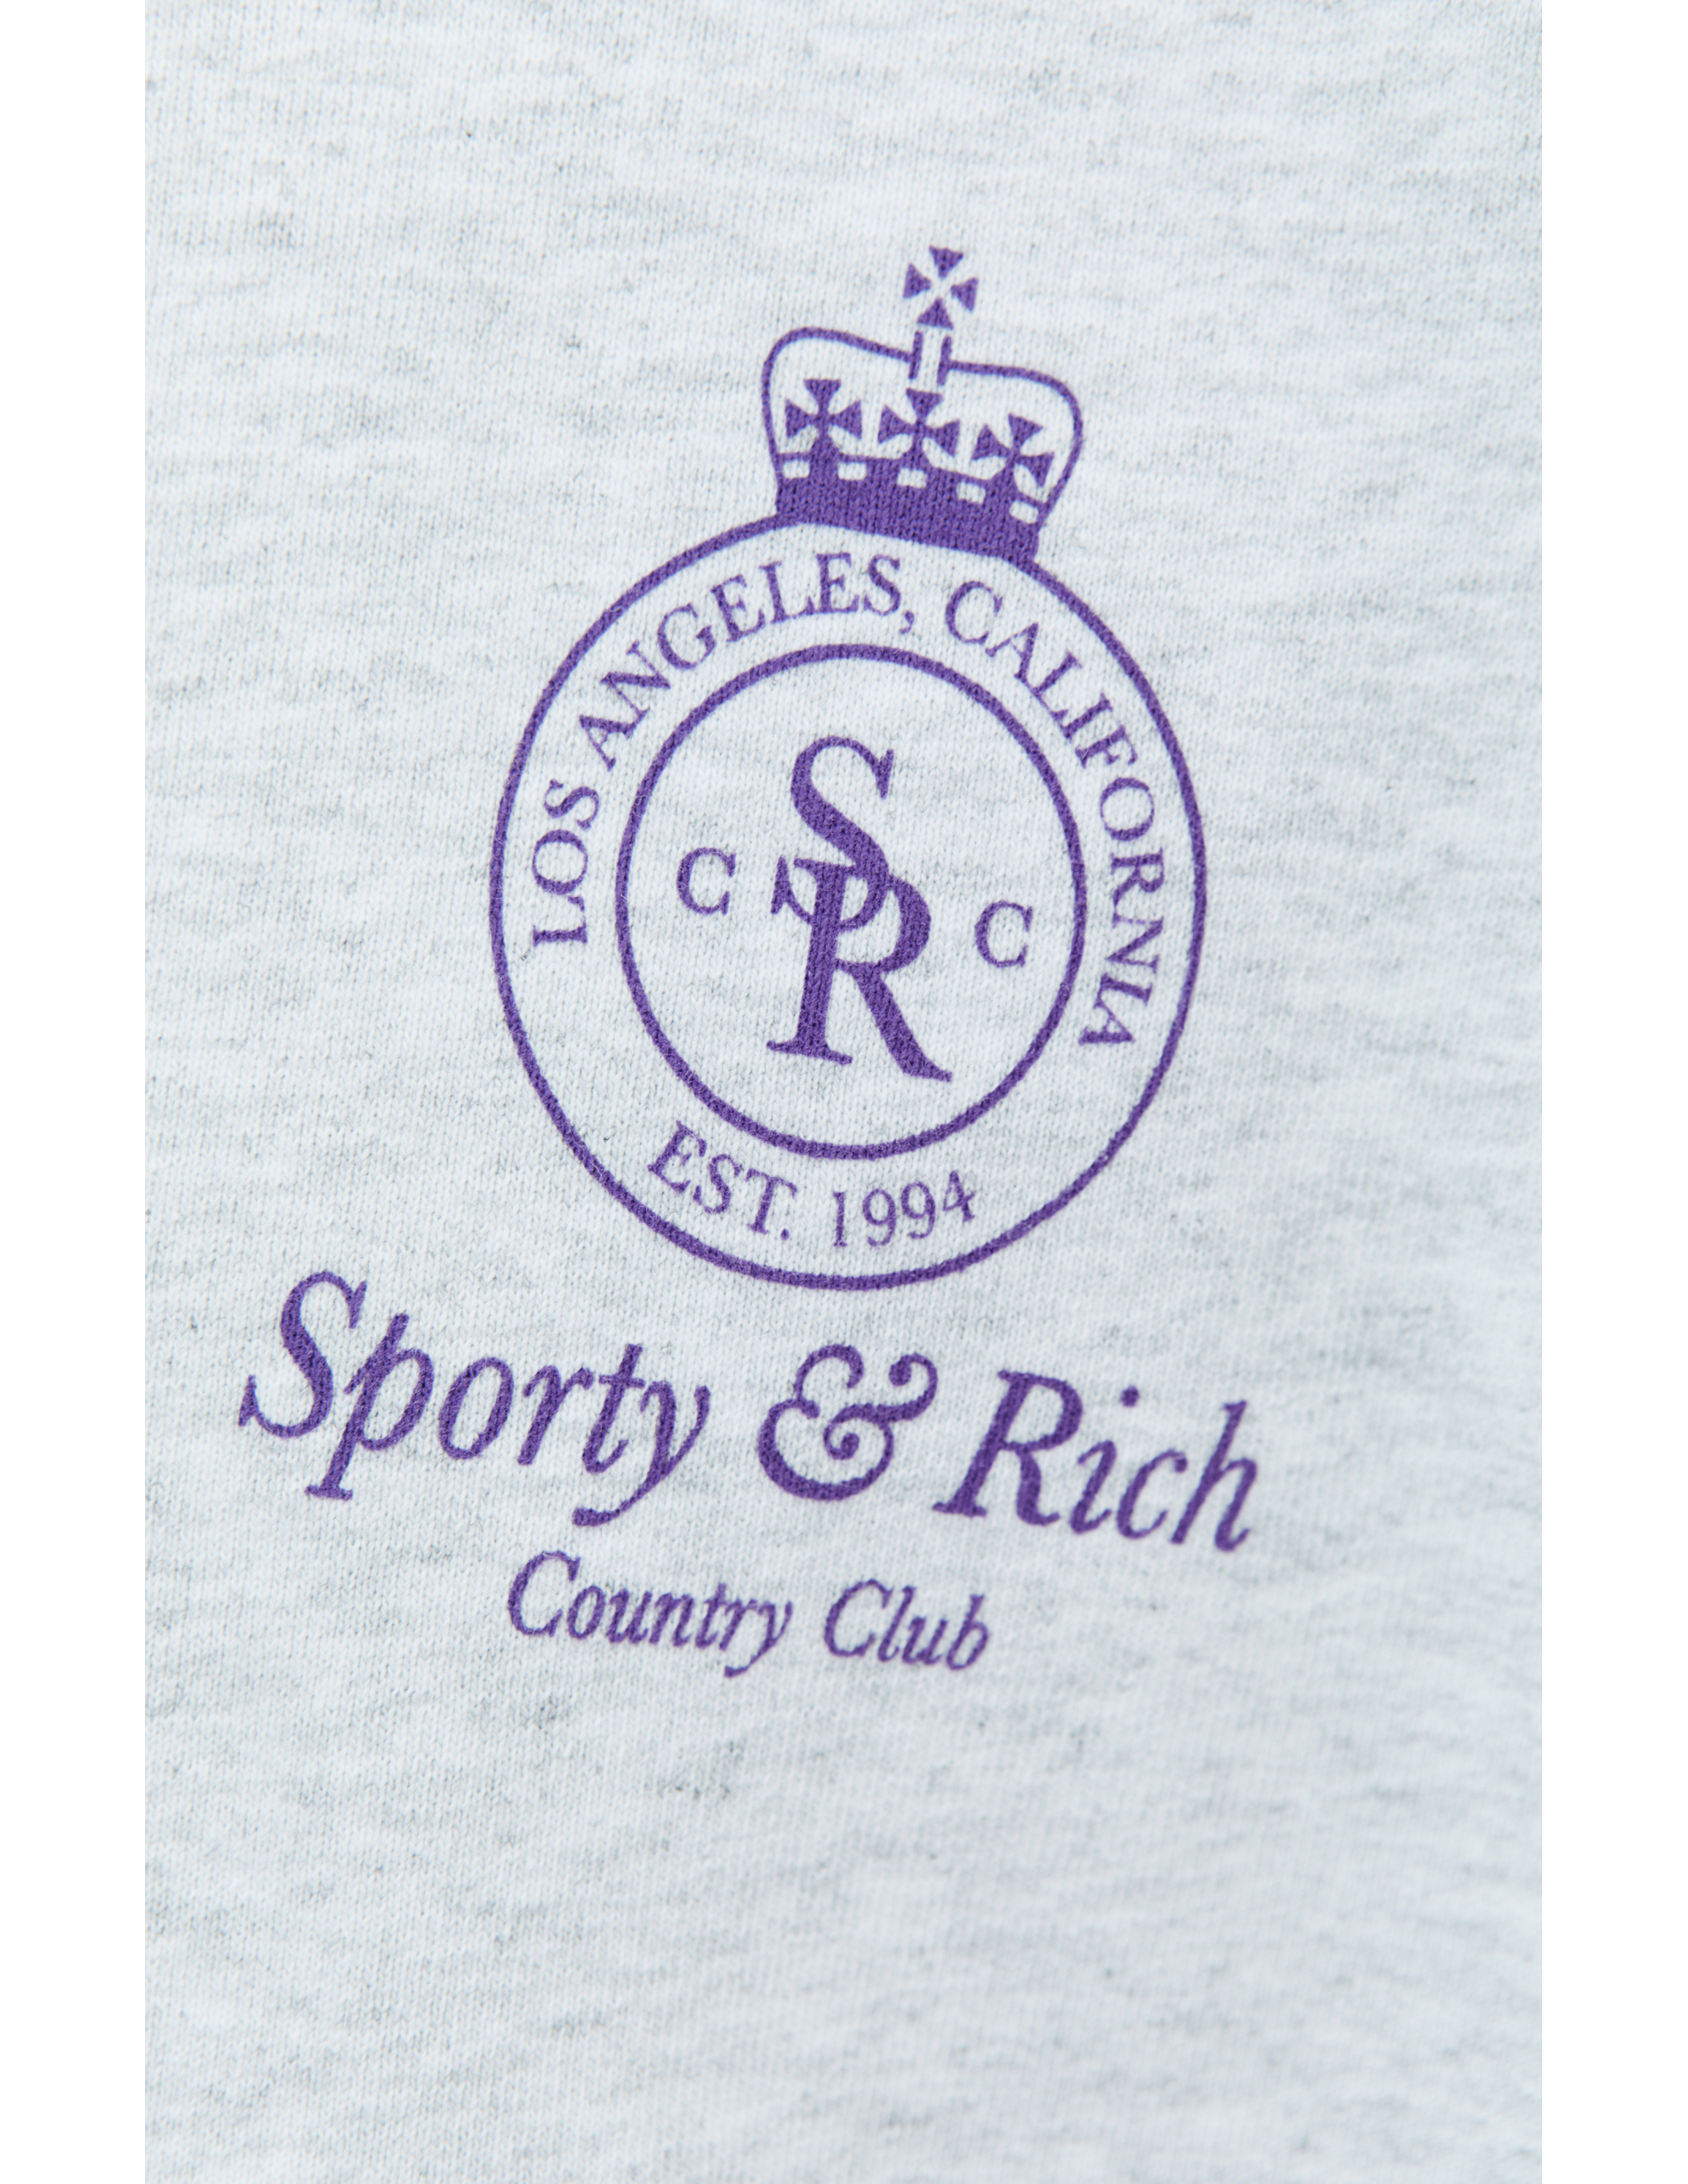 Sport me club. Sporty and Rich. Sporty and Rich логотип. Sporty and Rich купить. The small Sports Club.